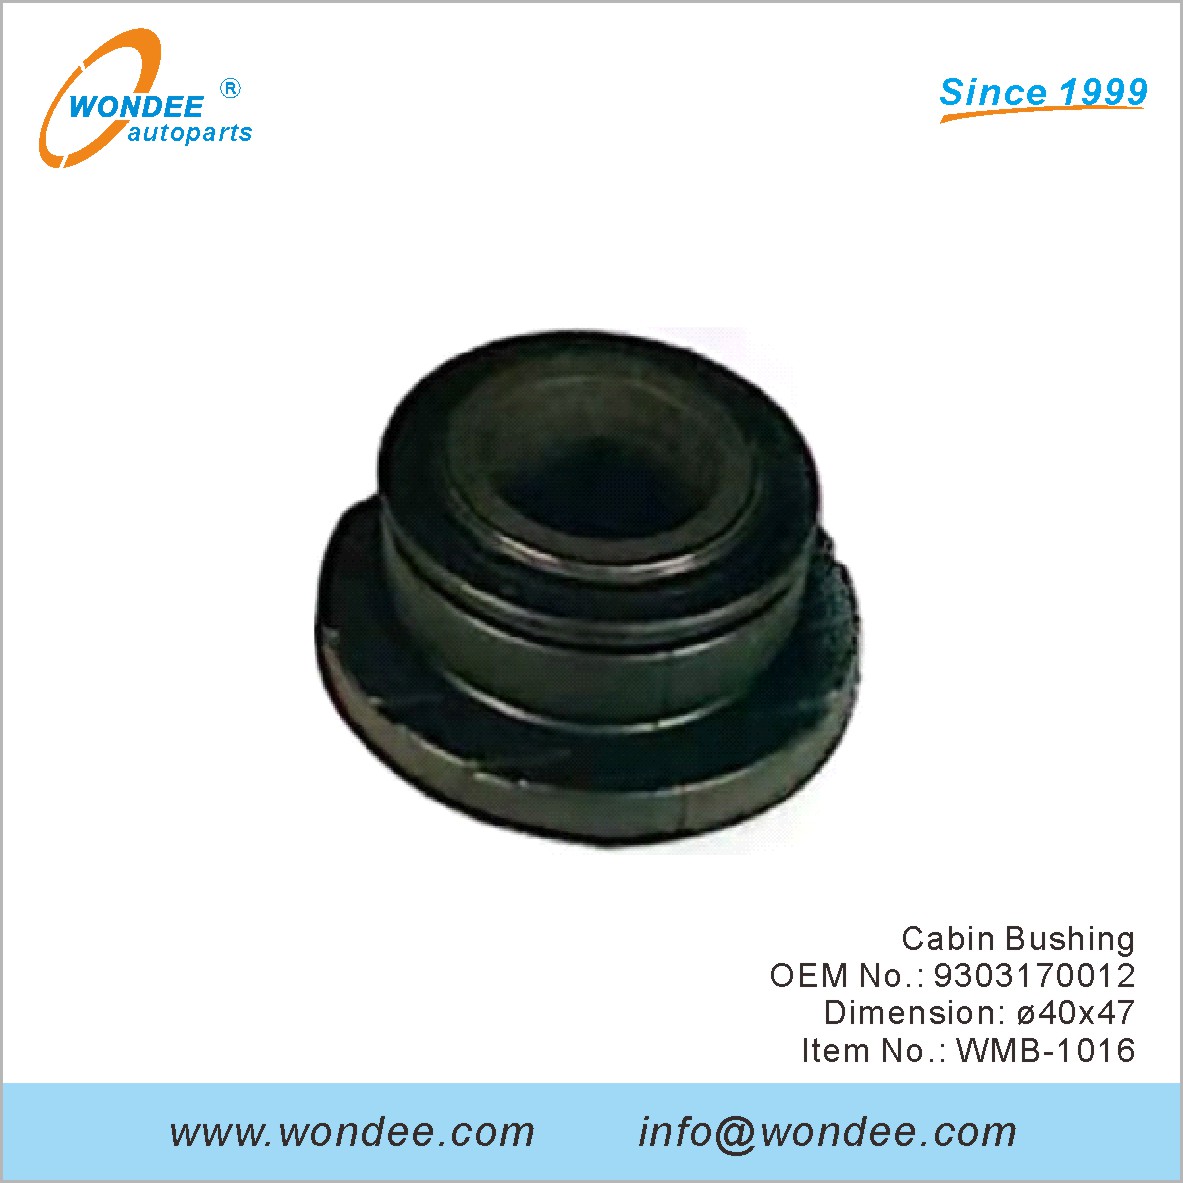 Cabin Bushing OEM 9303170012 for Benz from WONDEE